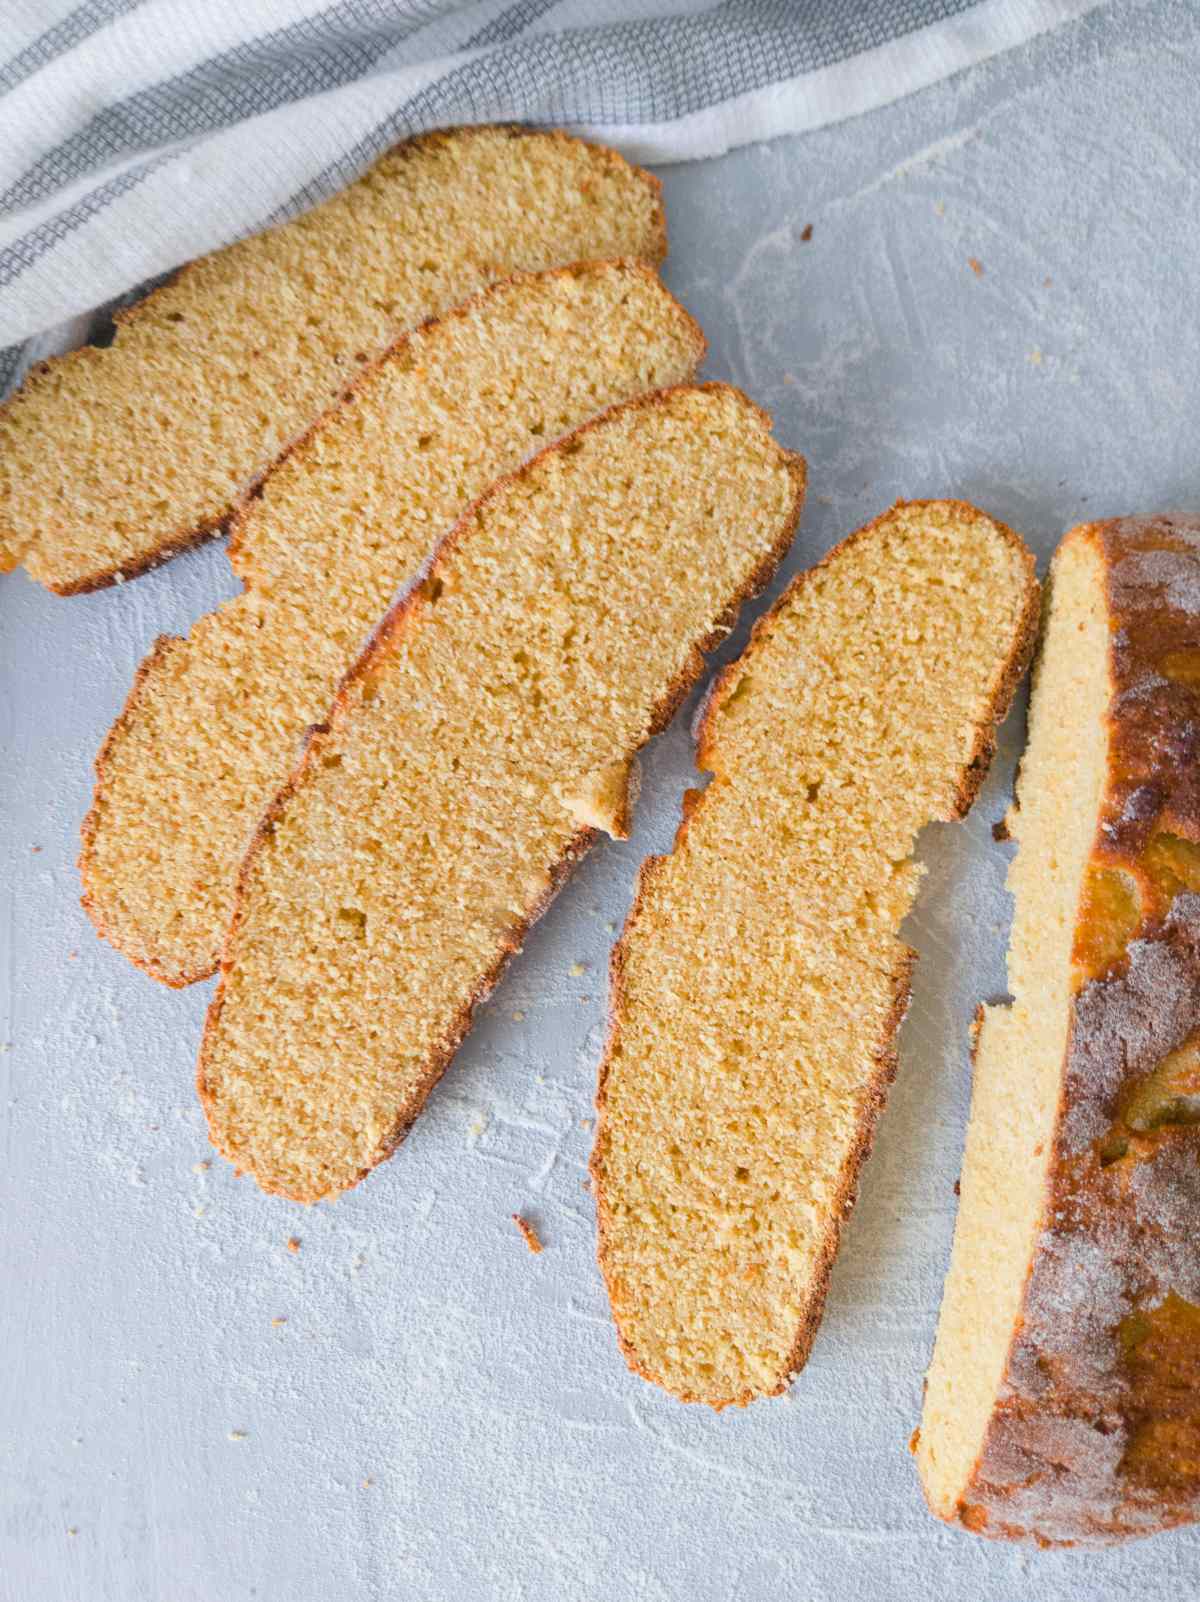 Gluten-free chickpea bread sliced on a light surface.